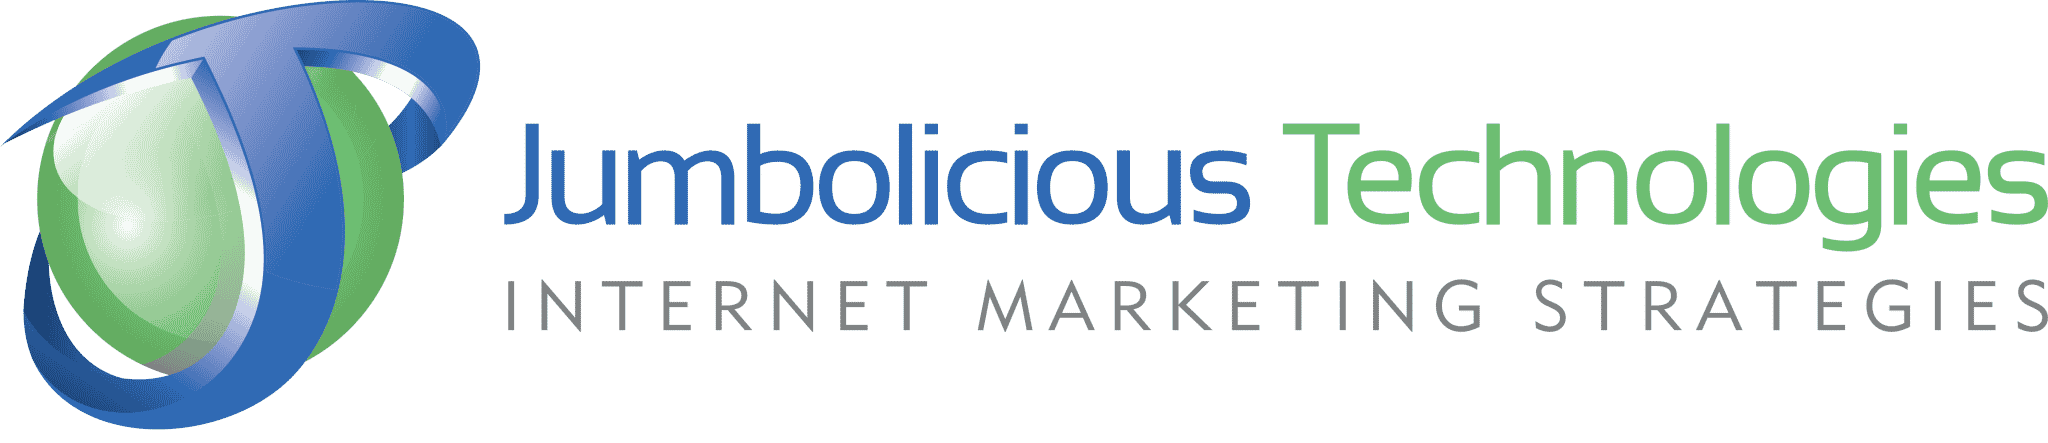 Digital Marketing Services and Solutions | Jumbolicious Technologies